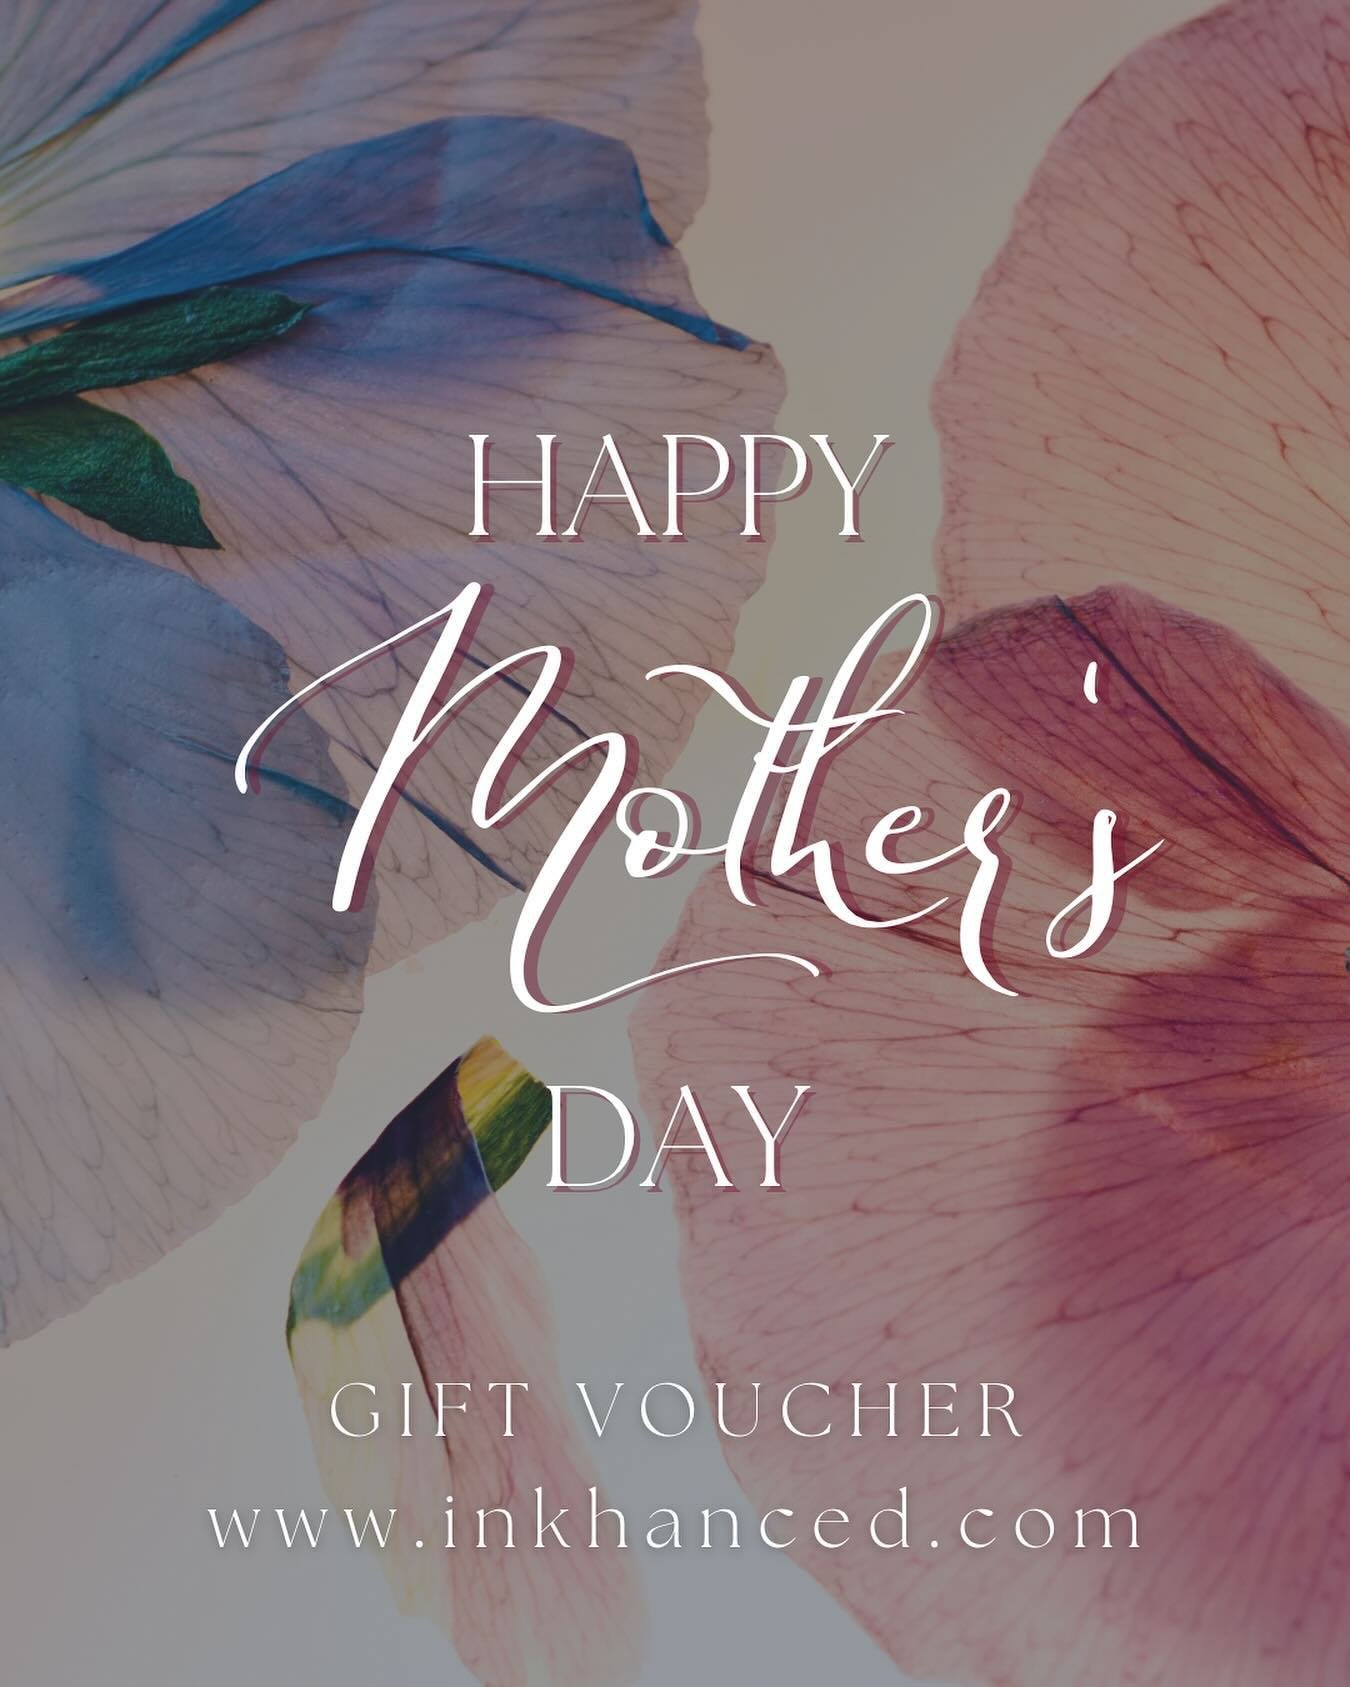 Celebrate your mum, grandmother, step mum, mother in law, guardian or that special person who deserves an appreciation this Mother&rsquo;s Day💞

Gift vouchers available in store or online 💐

www.inkhanced.com